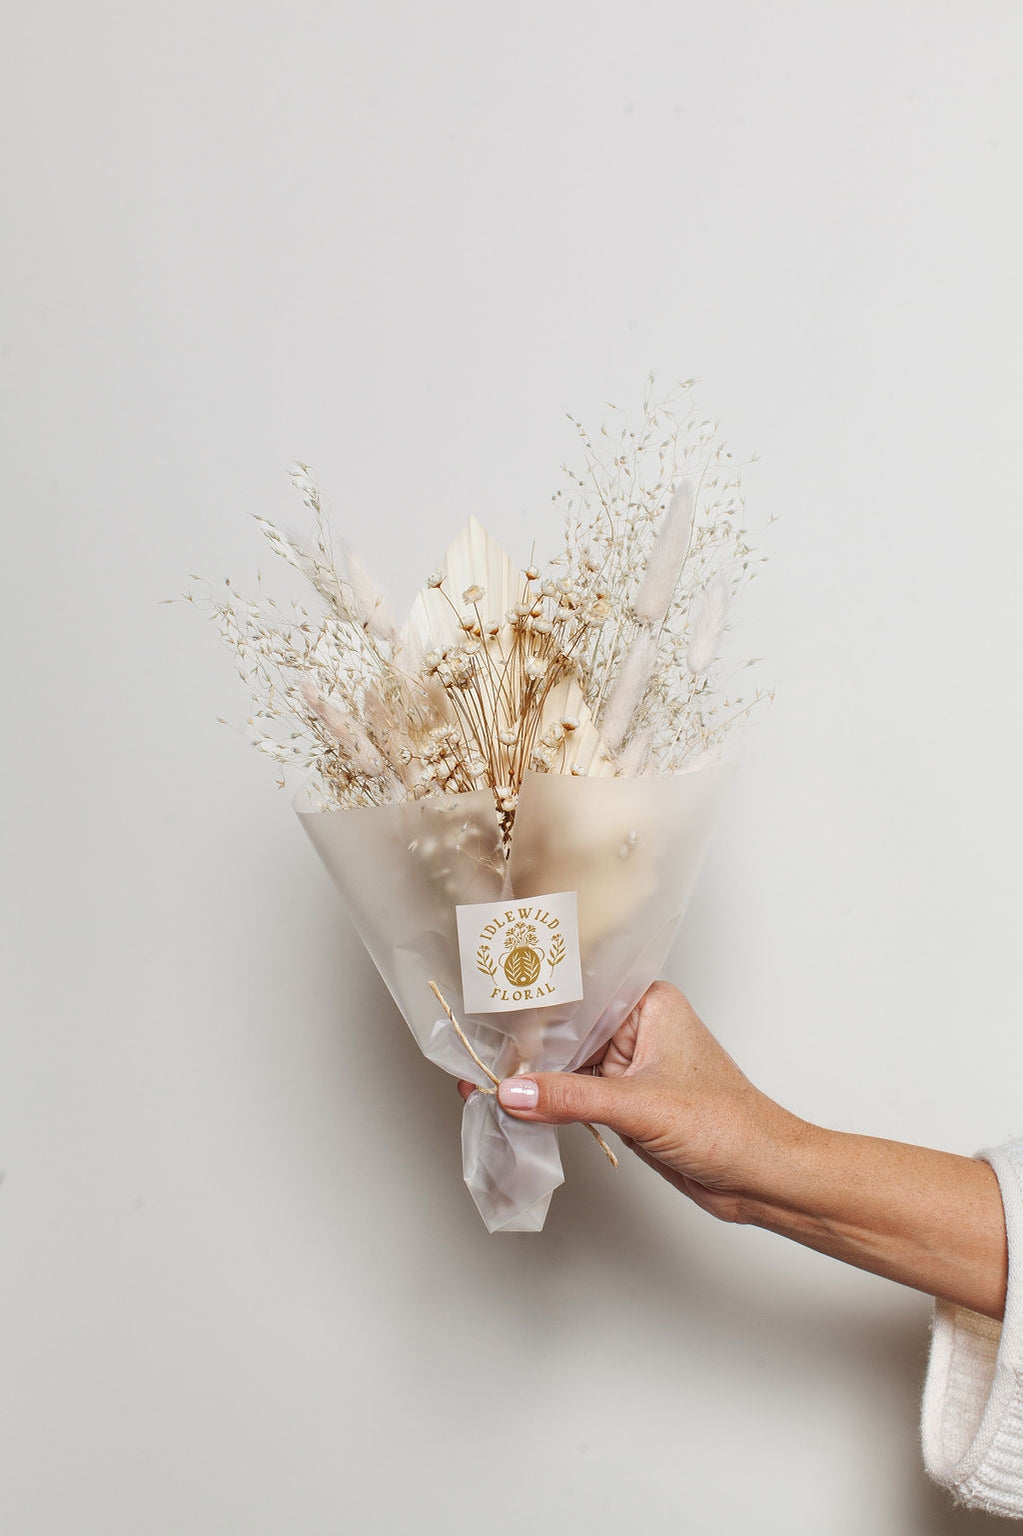 This dried bouquet is carefully arranged by a team of designers in Idlewild Floral Co's California studio, and are made of beautifully preserved long lasting flowers. Perfect paired with a bud vase or as a gift for any occasion. Each bouquet is 12"-14" long x 4"-6" wide.